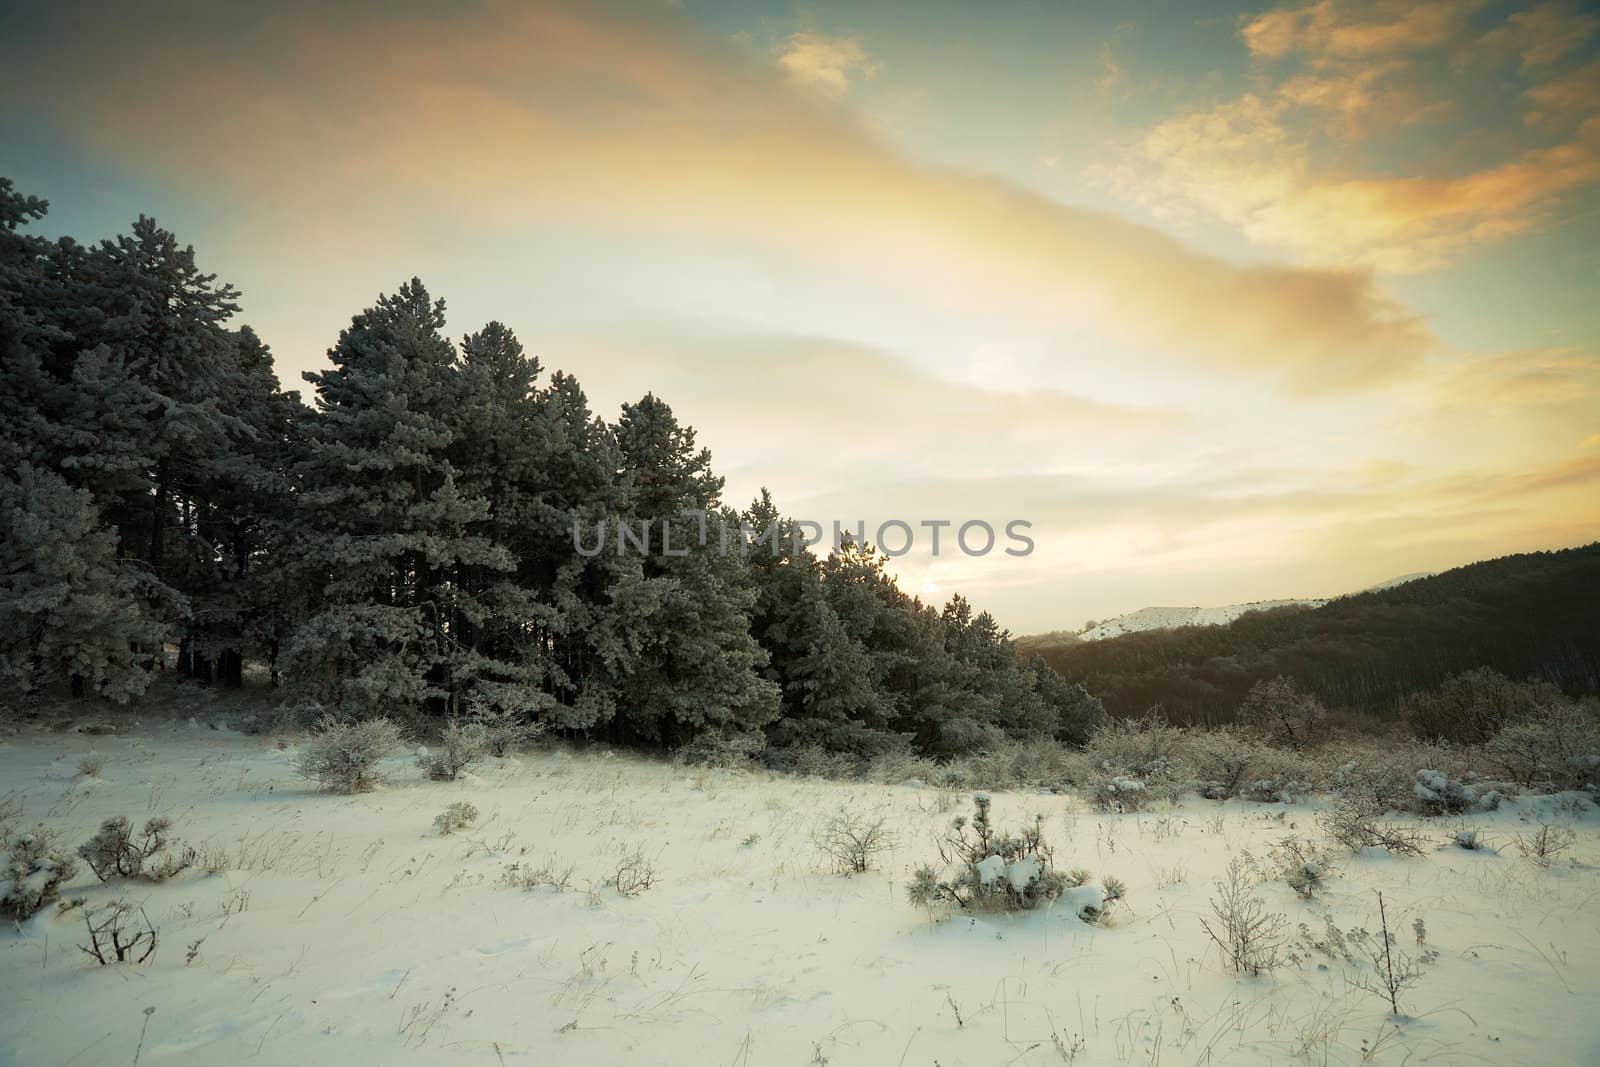 Sunset mountain landscape with pine forest and snow